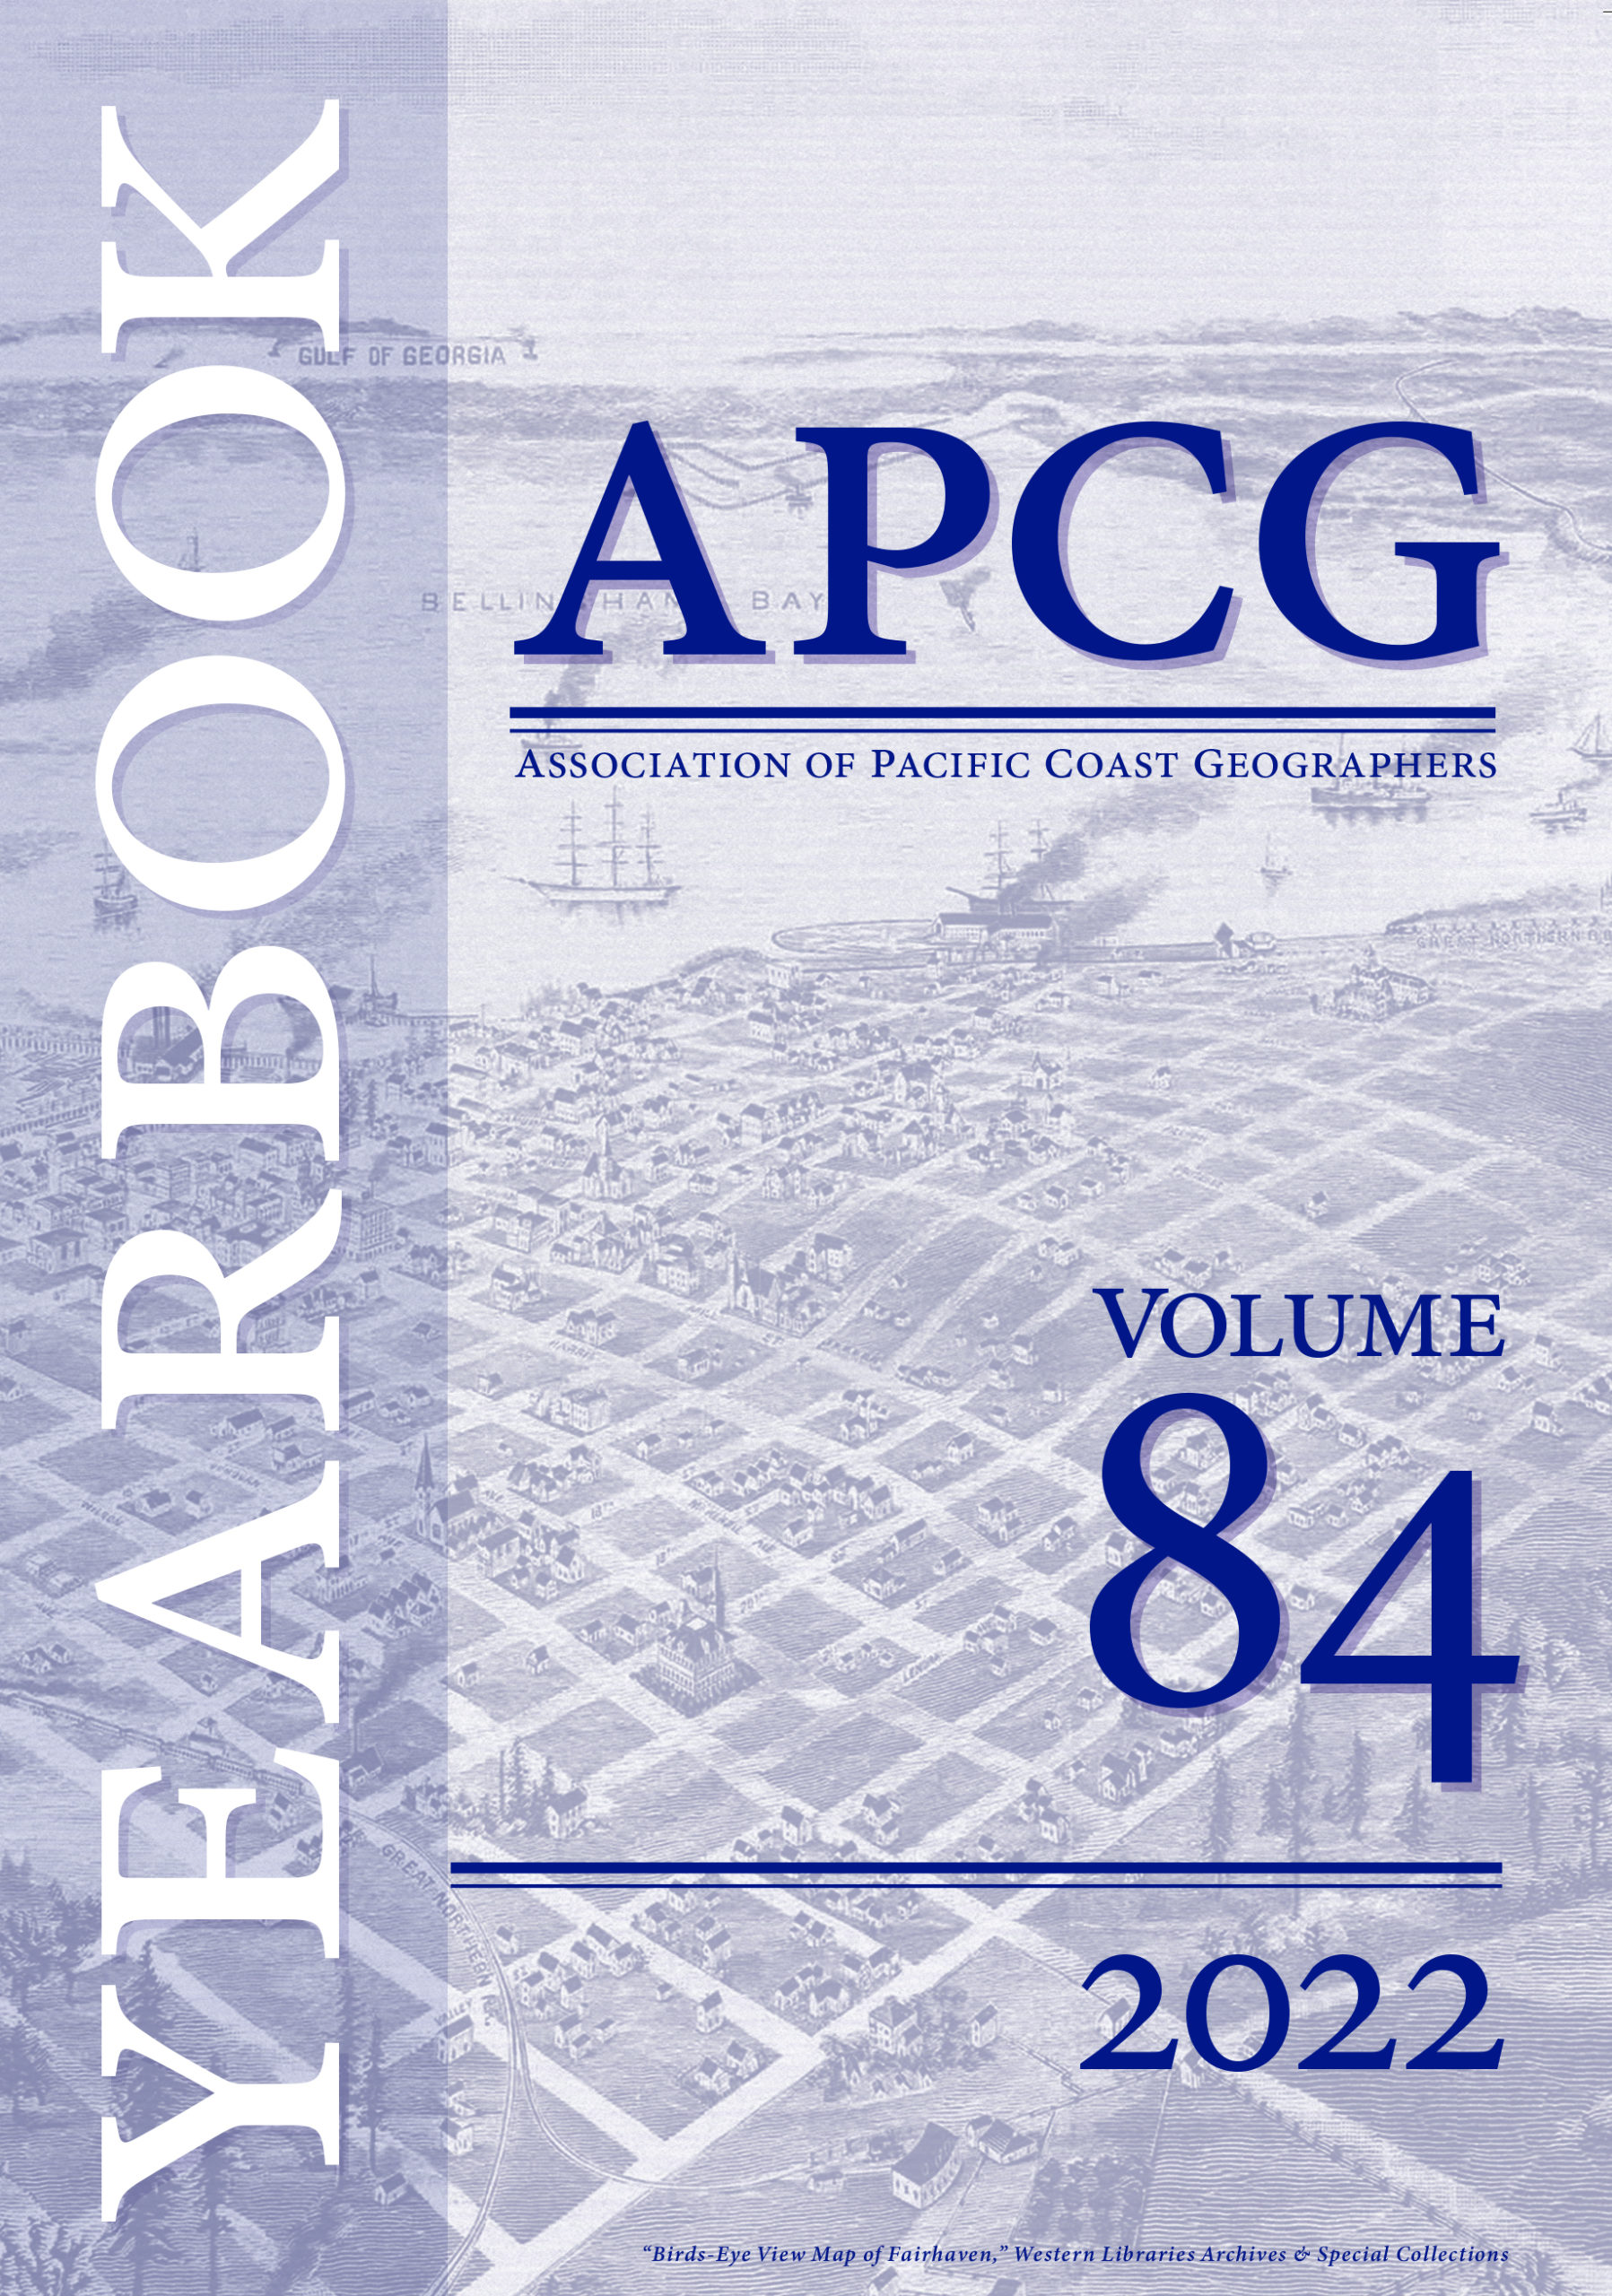 Yearbook of the Association of Pacific Coast Geographers